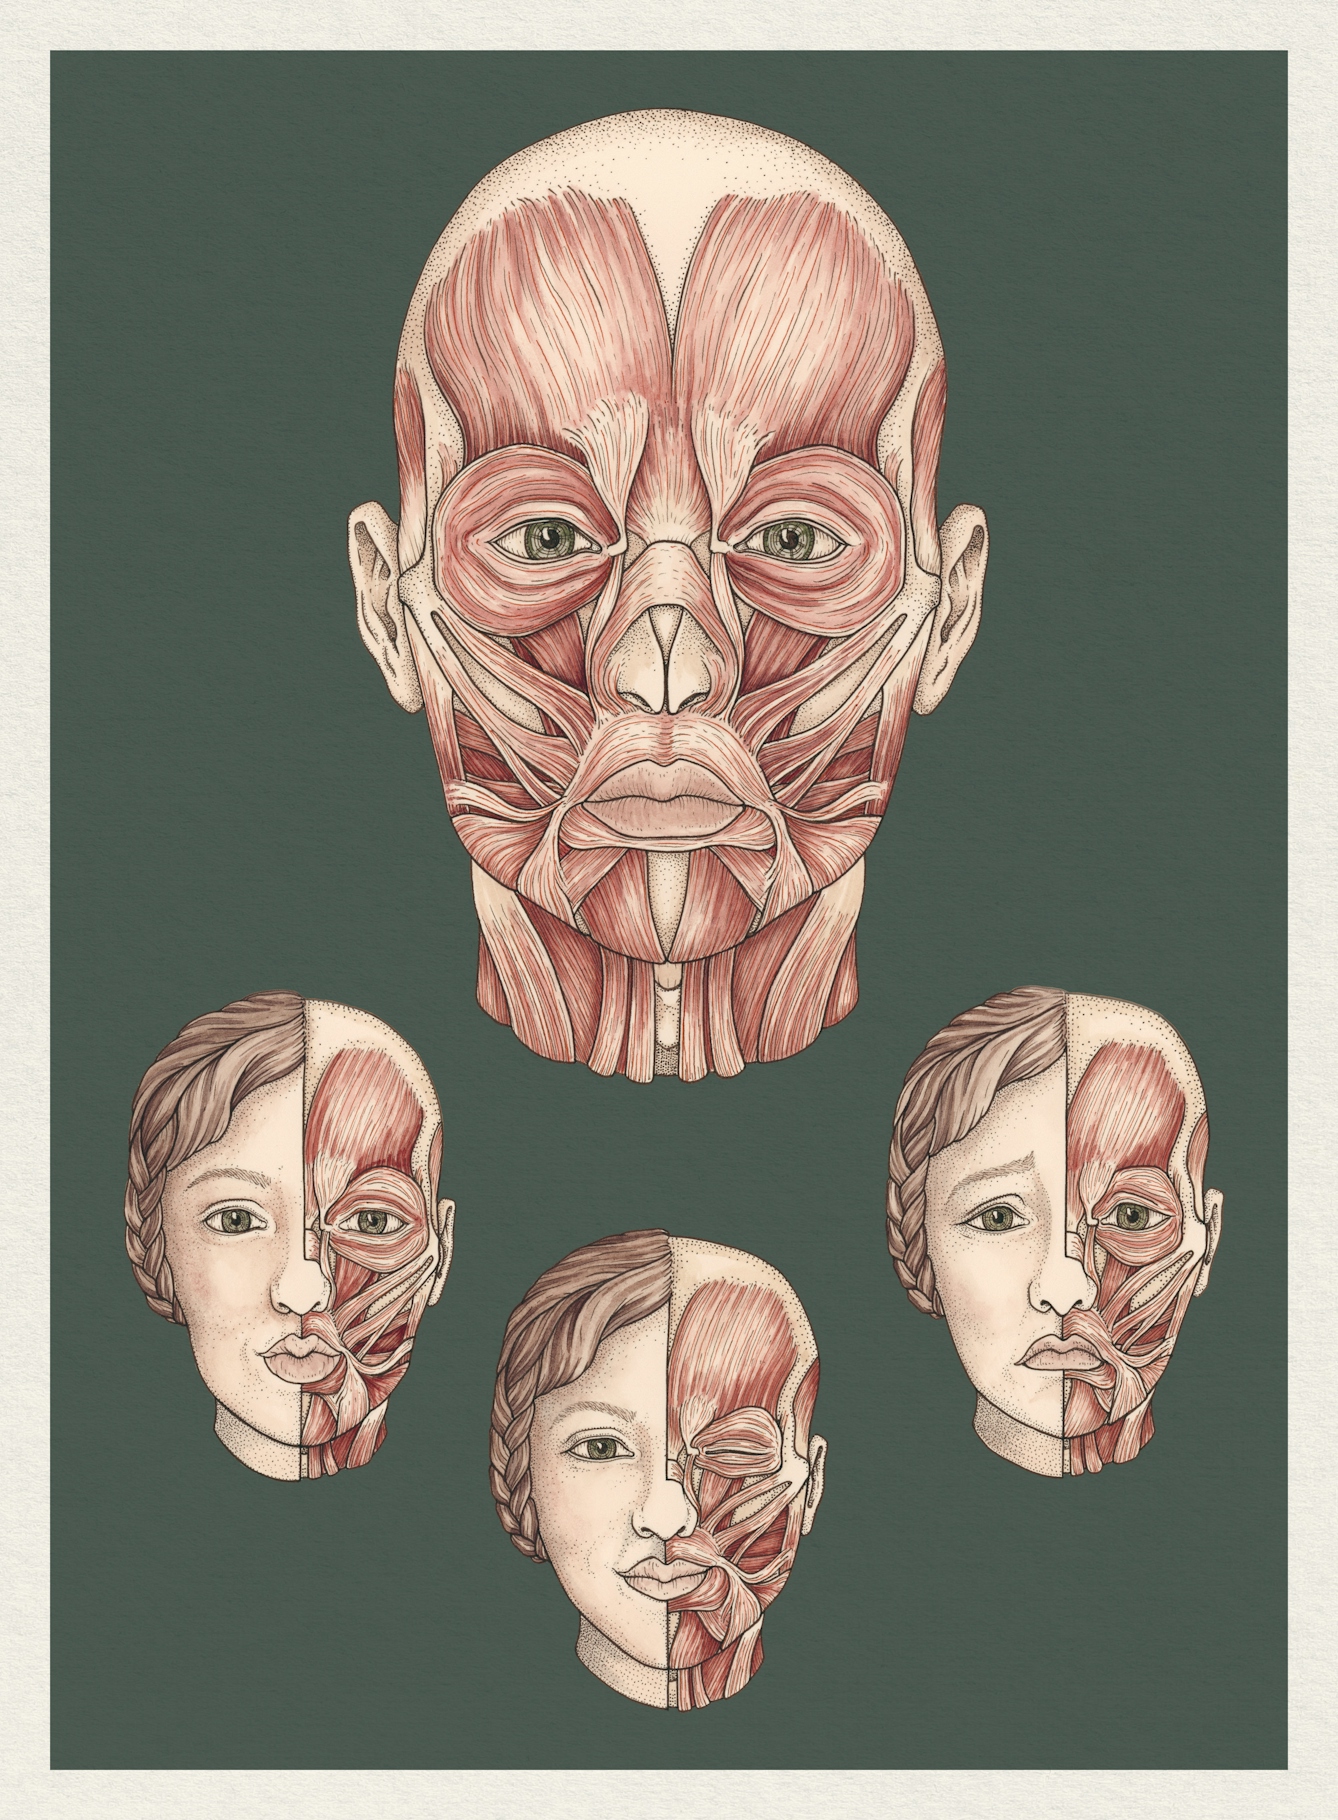 Illustration showing the muscles in the human face